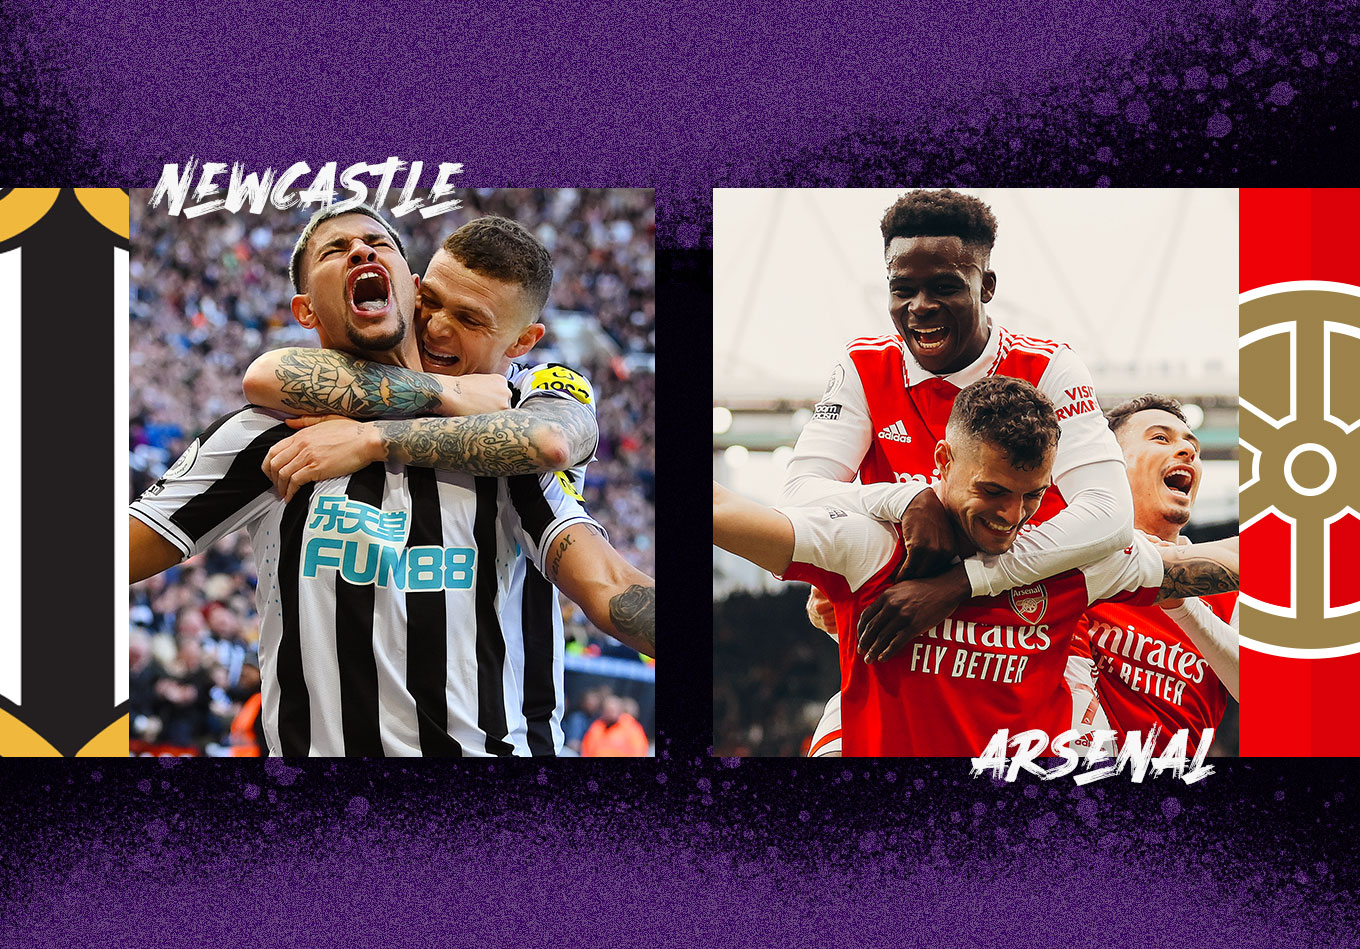 sokapro-The weekend Premier League action is back and Newcastle square it out with Arsenal, who will win?